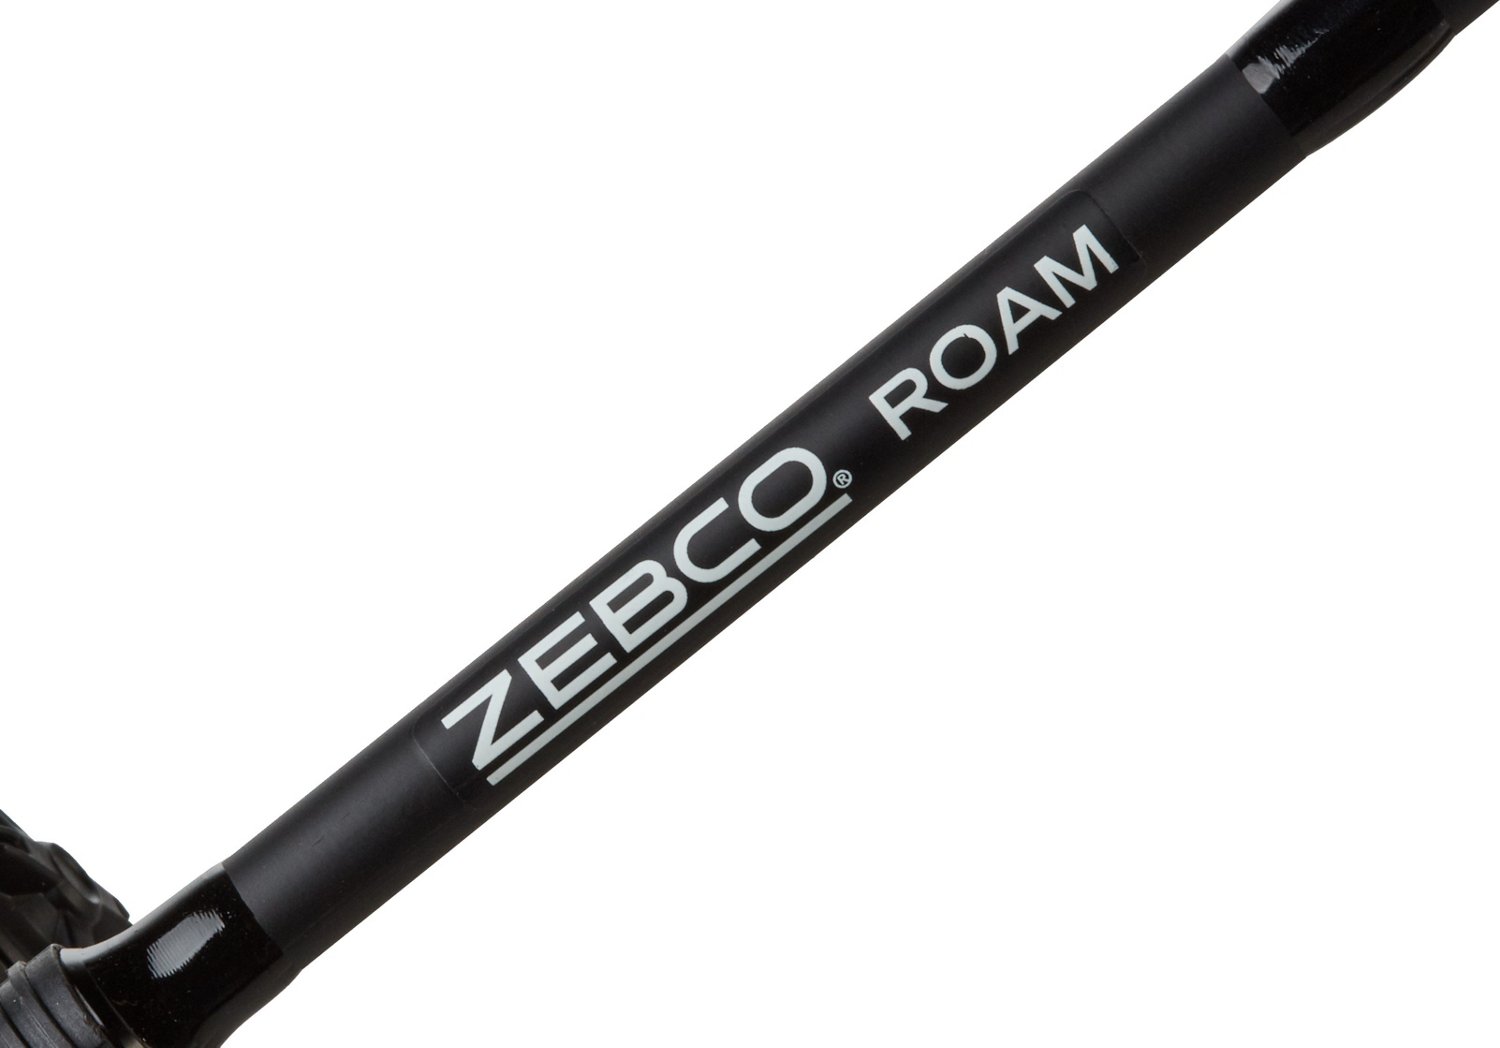 Zebco Roam 30Z 662M Spinning Rod and Reel Combo Pink - Corlane Sporting  Goods Ltd.